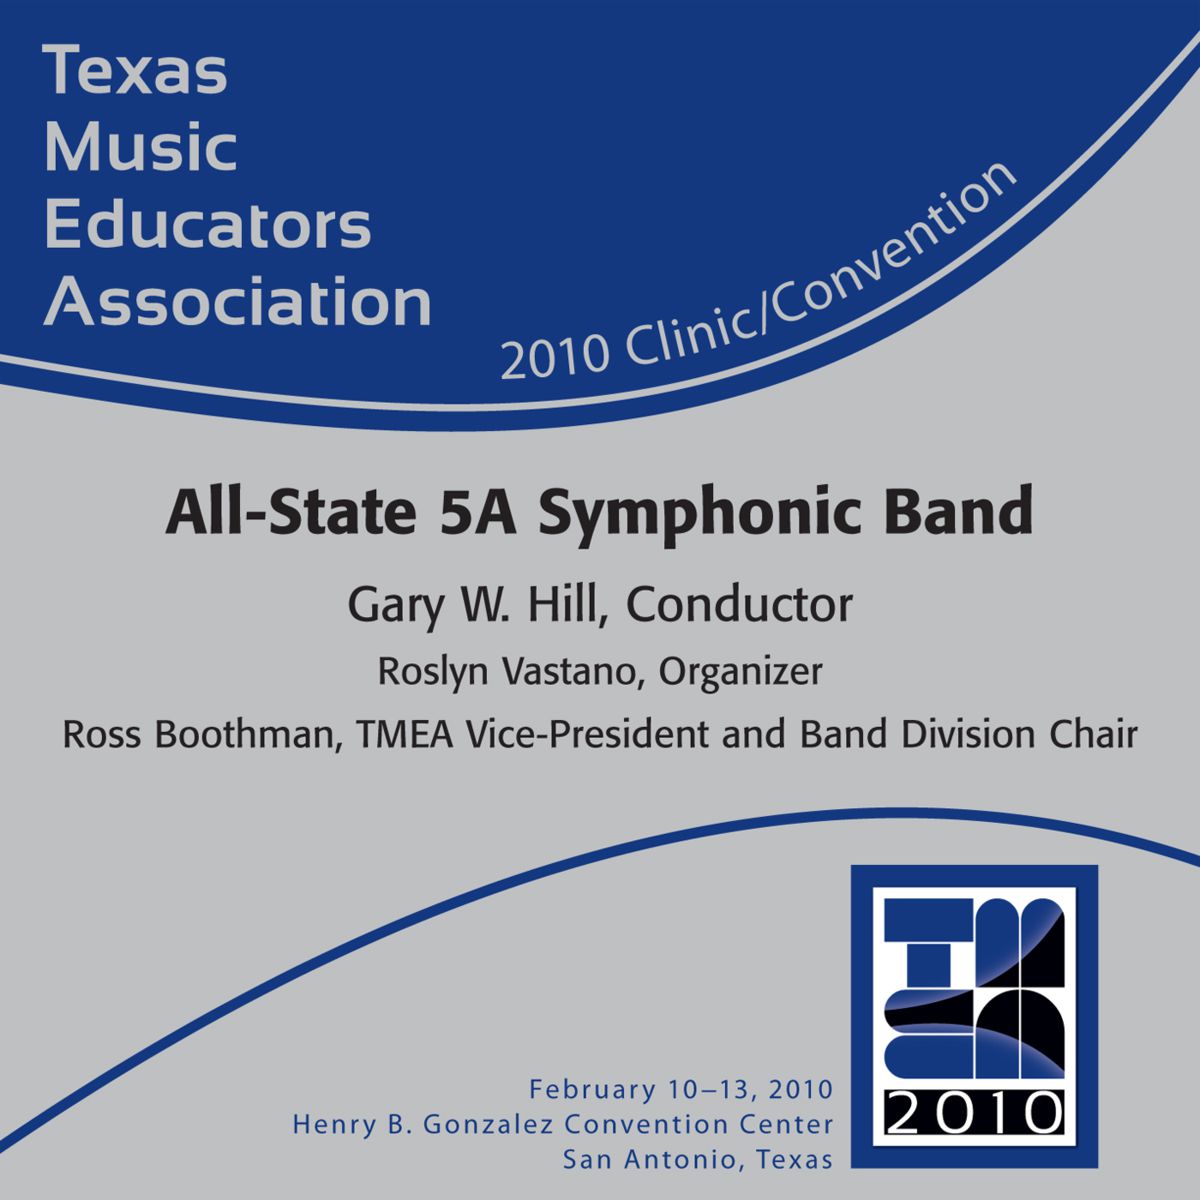 2010 Texas Music Educators Association: All-State 5A Smphonic Band - clicca qui